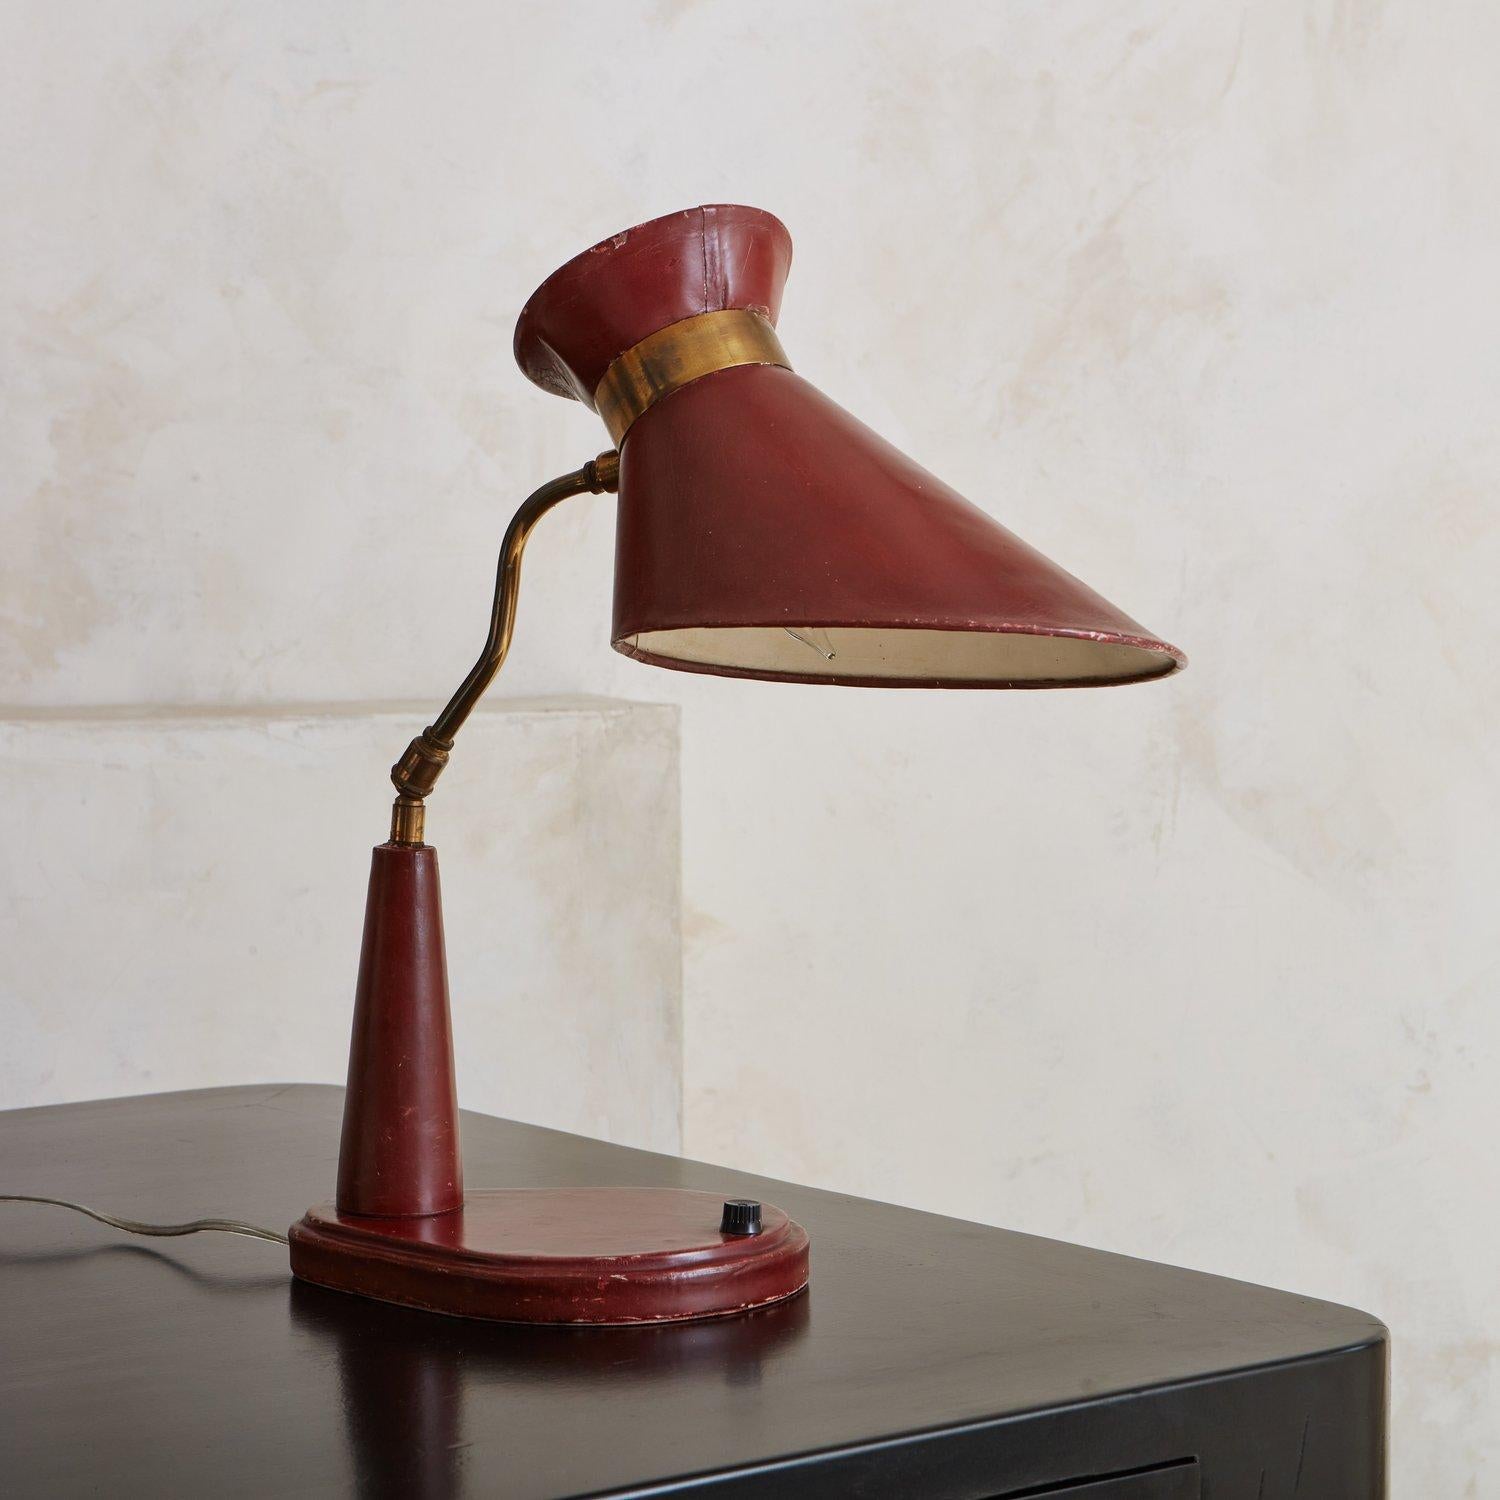 A 1950s desk lamp in the style of Jacques Adnet. This lamp has a sculptural shade and body clad in red leather with a black acrylic switch. It has a curved, adjustable brass stem with a beautiful patina. Sourced in France, 1950s.